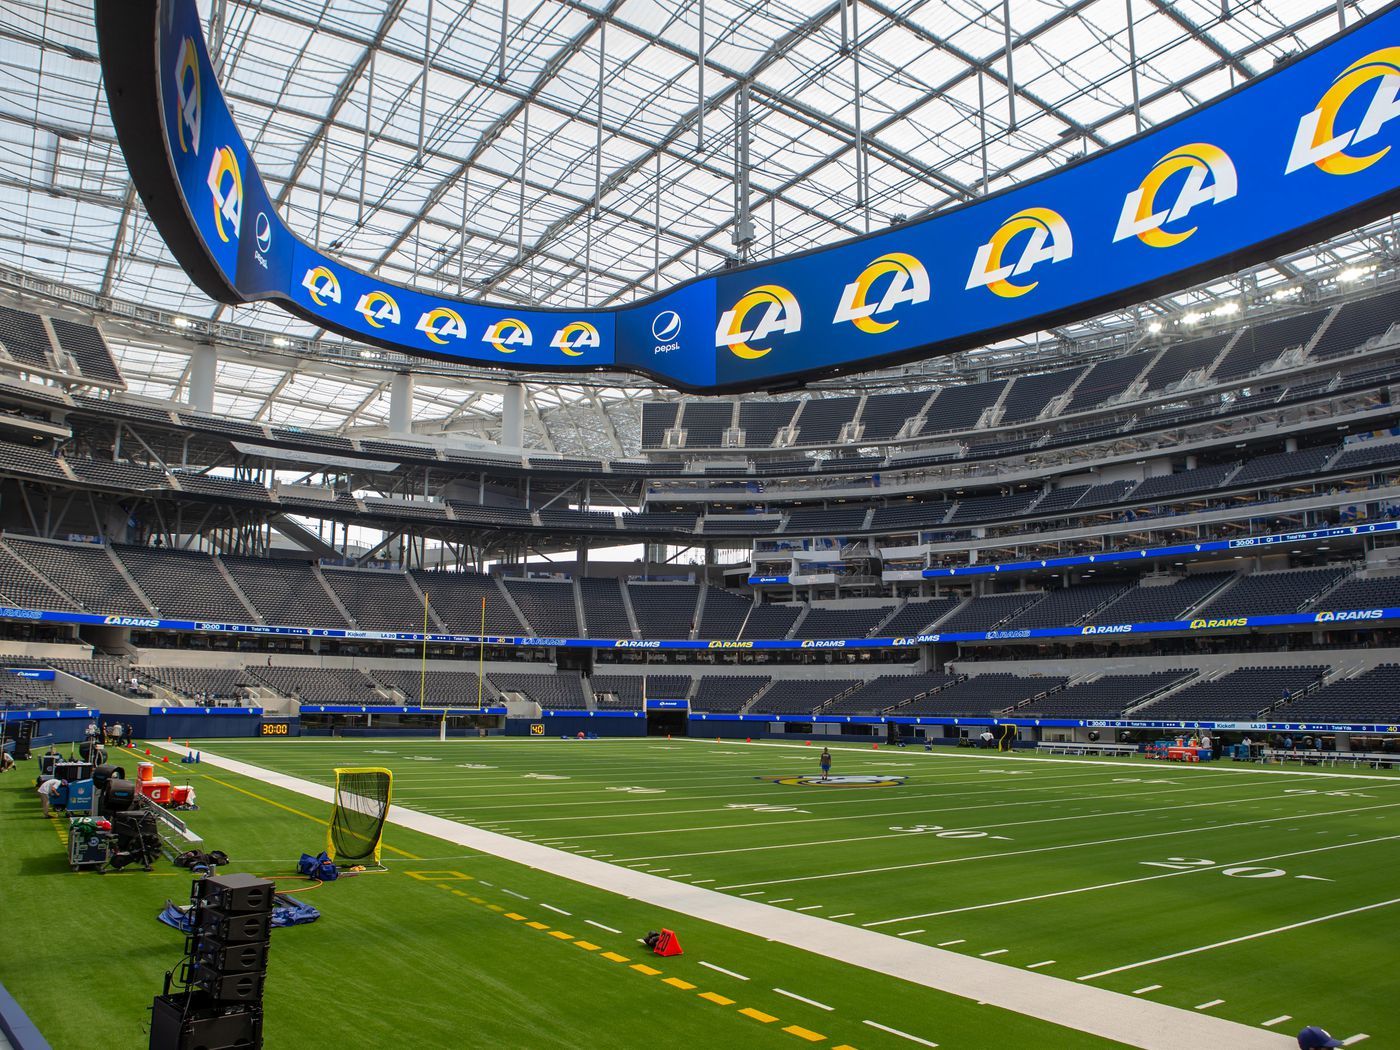 Rams, Chargers Covid 19 Stadium Policy 2020: Teams Announce No Fans 'until Further Notice'